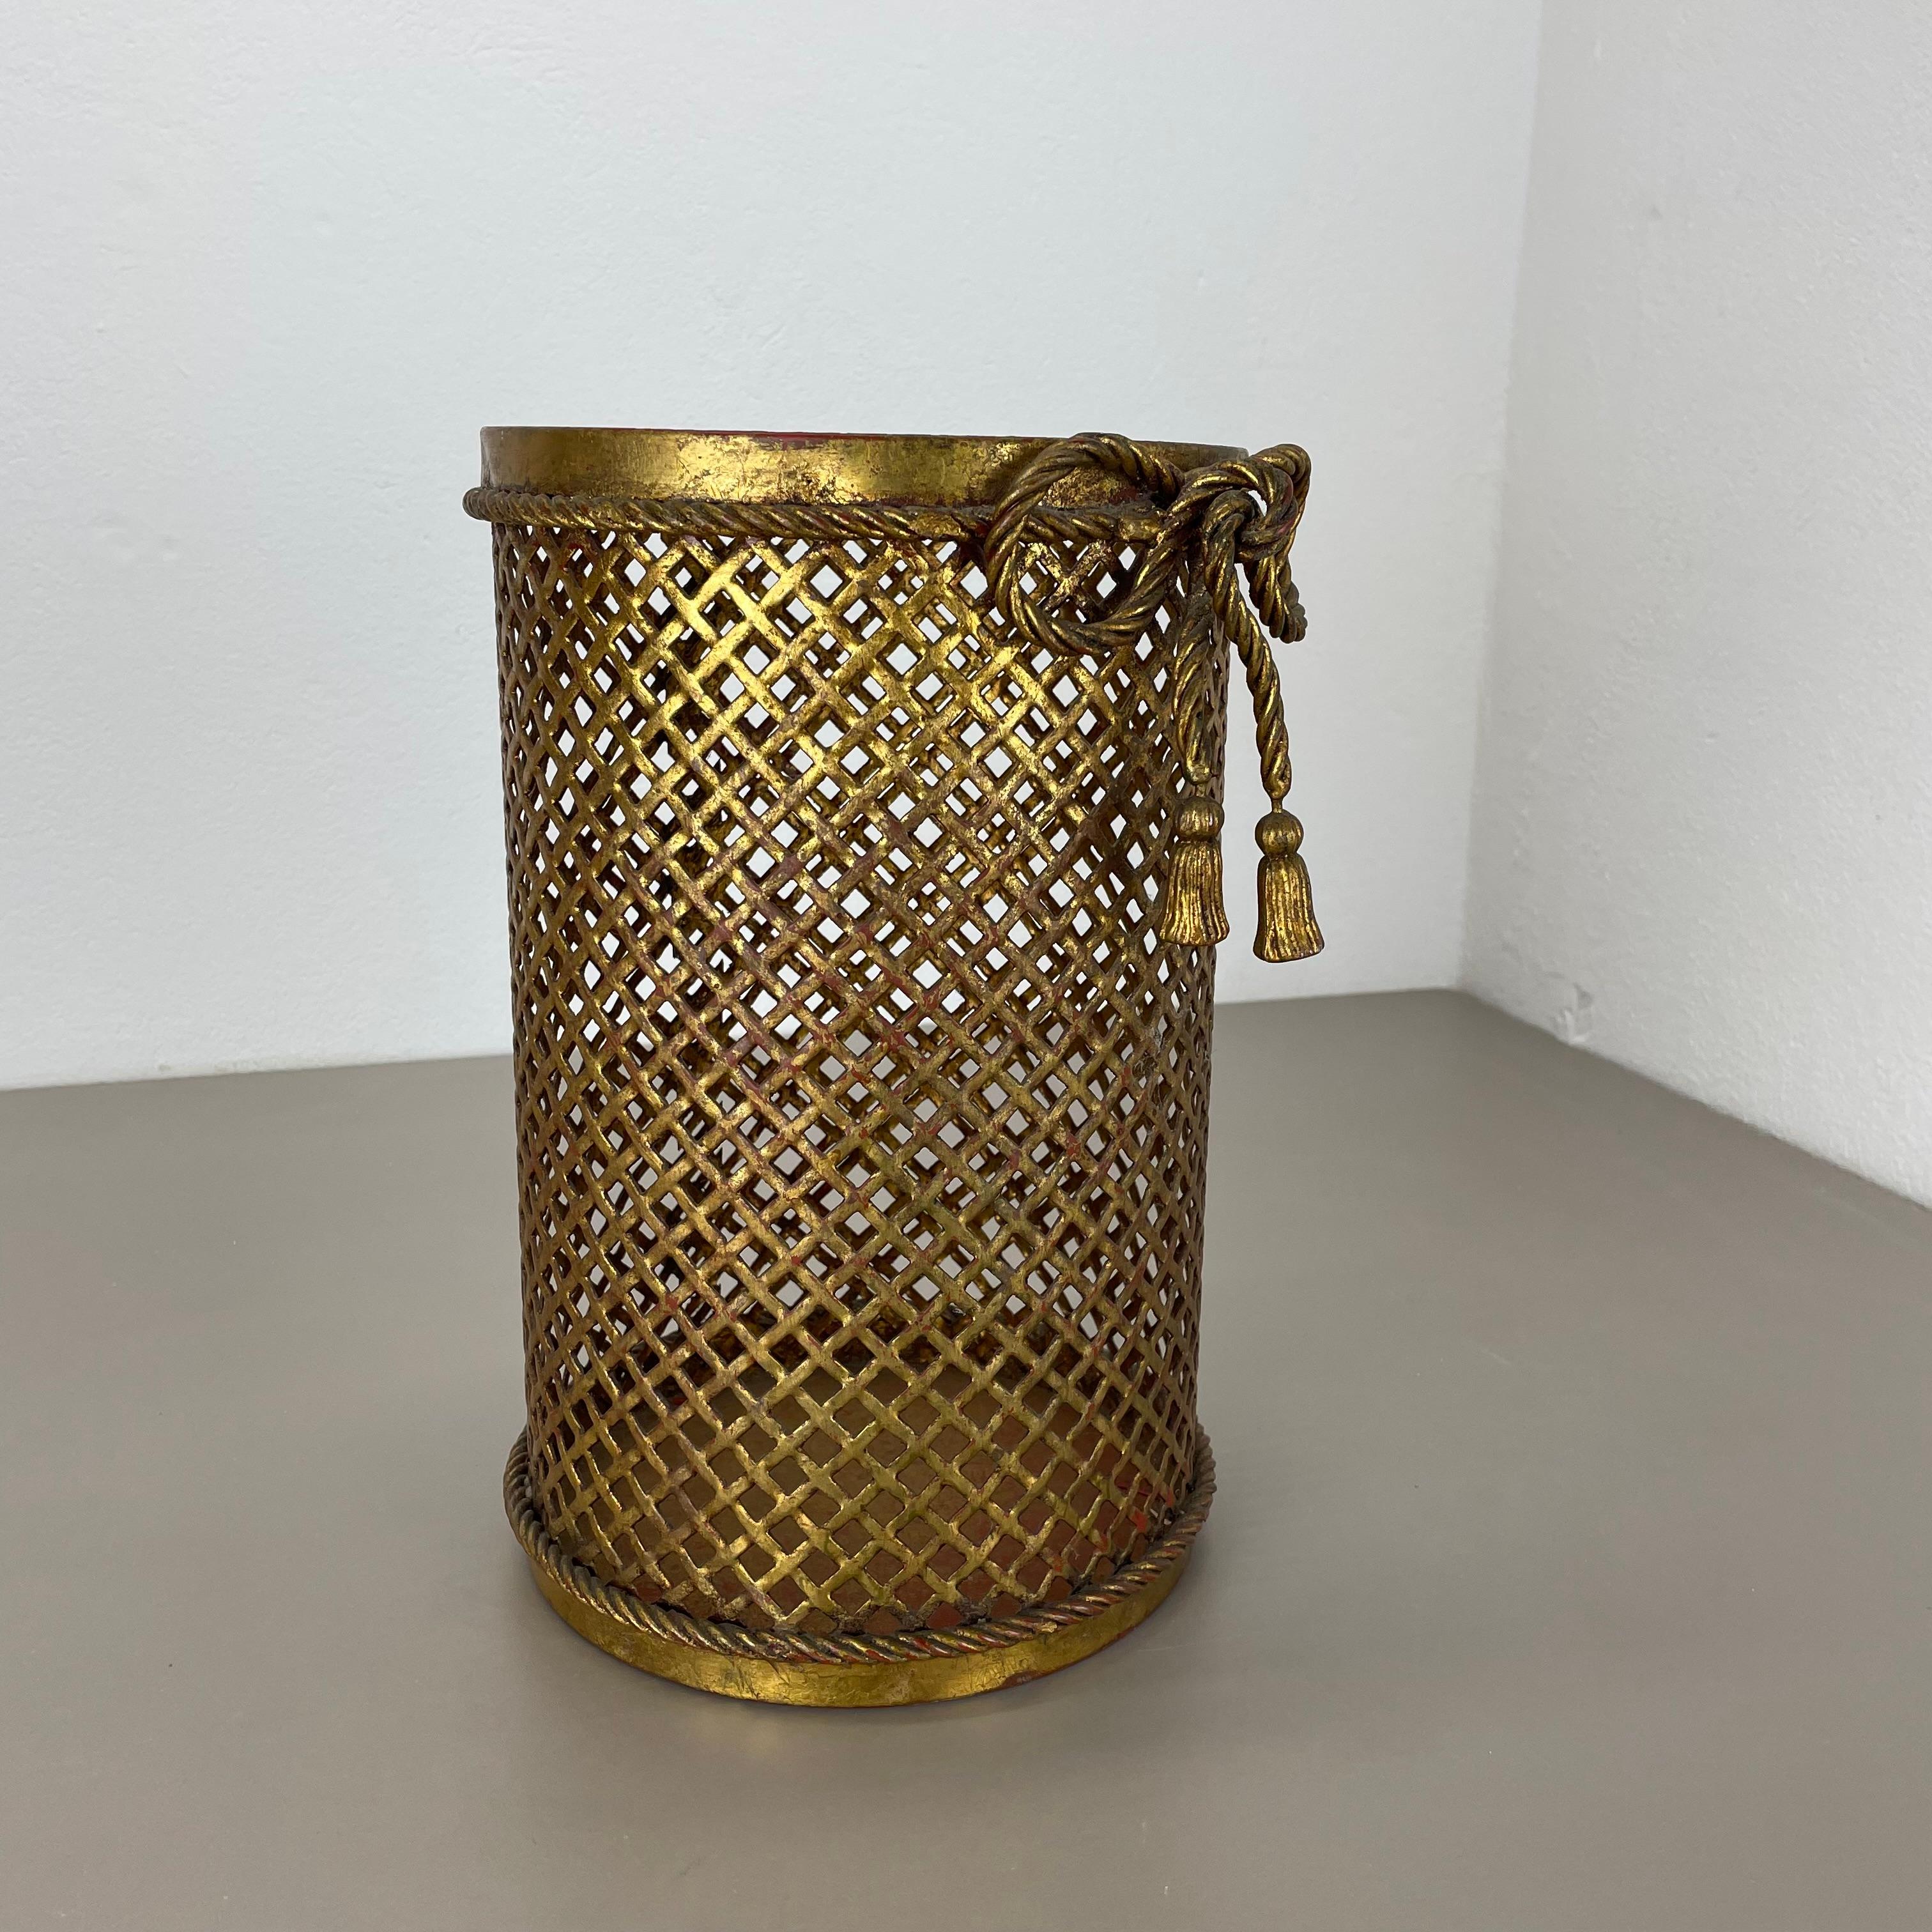 Hollywood Regency Gilded Waste Paper Basket by Li Puma, Firenze, Italy, 1950s In Fair Condition For Sale In Kirchlengern, DE